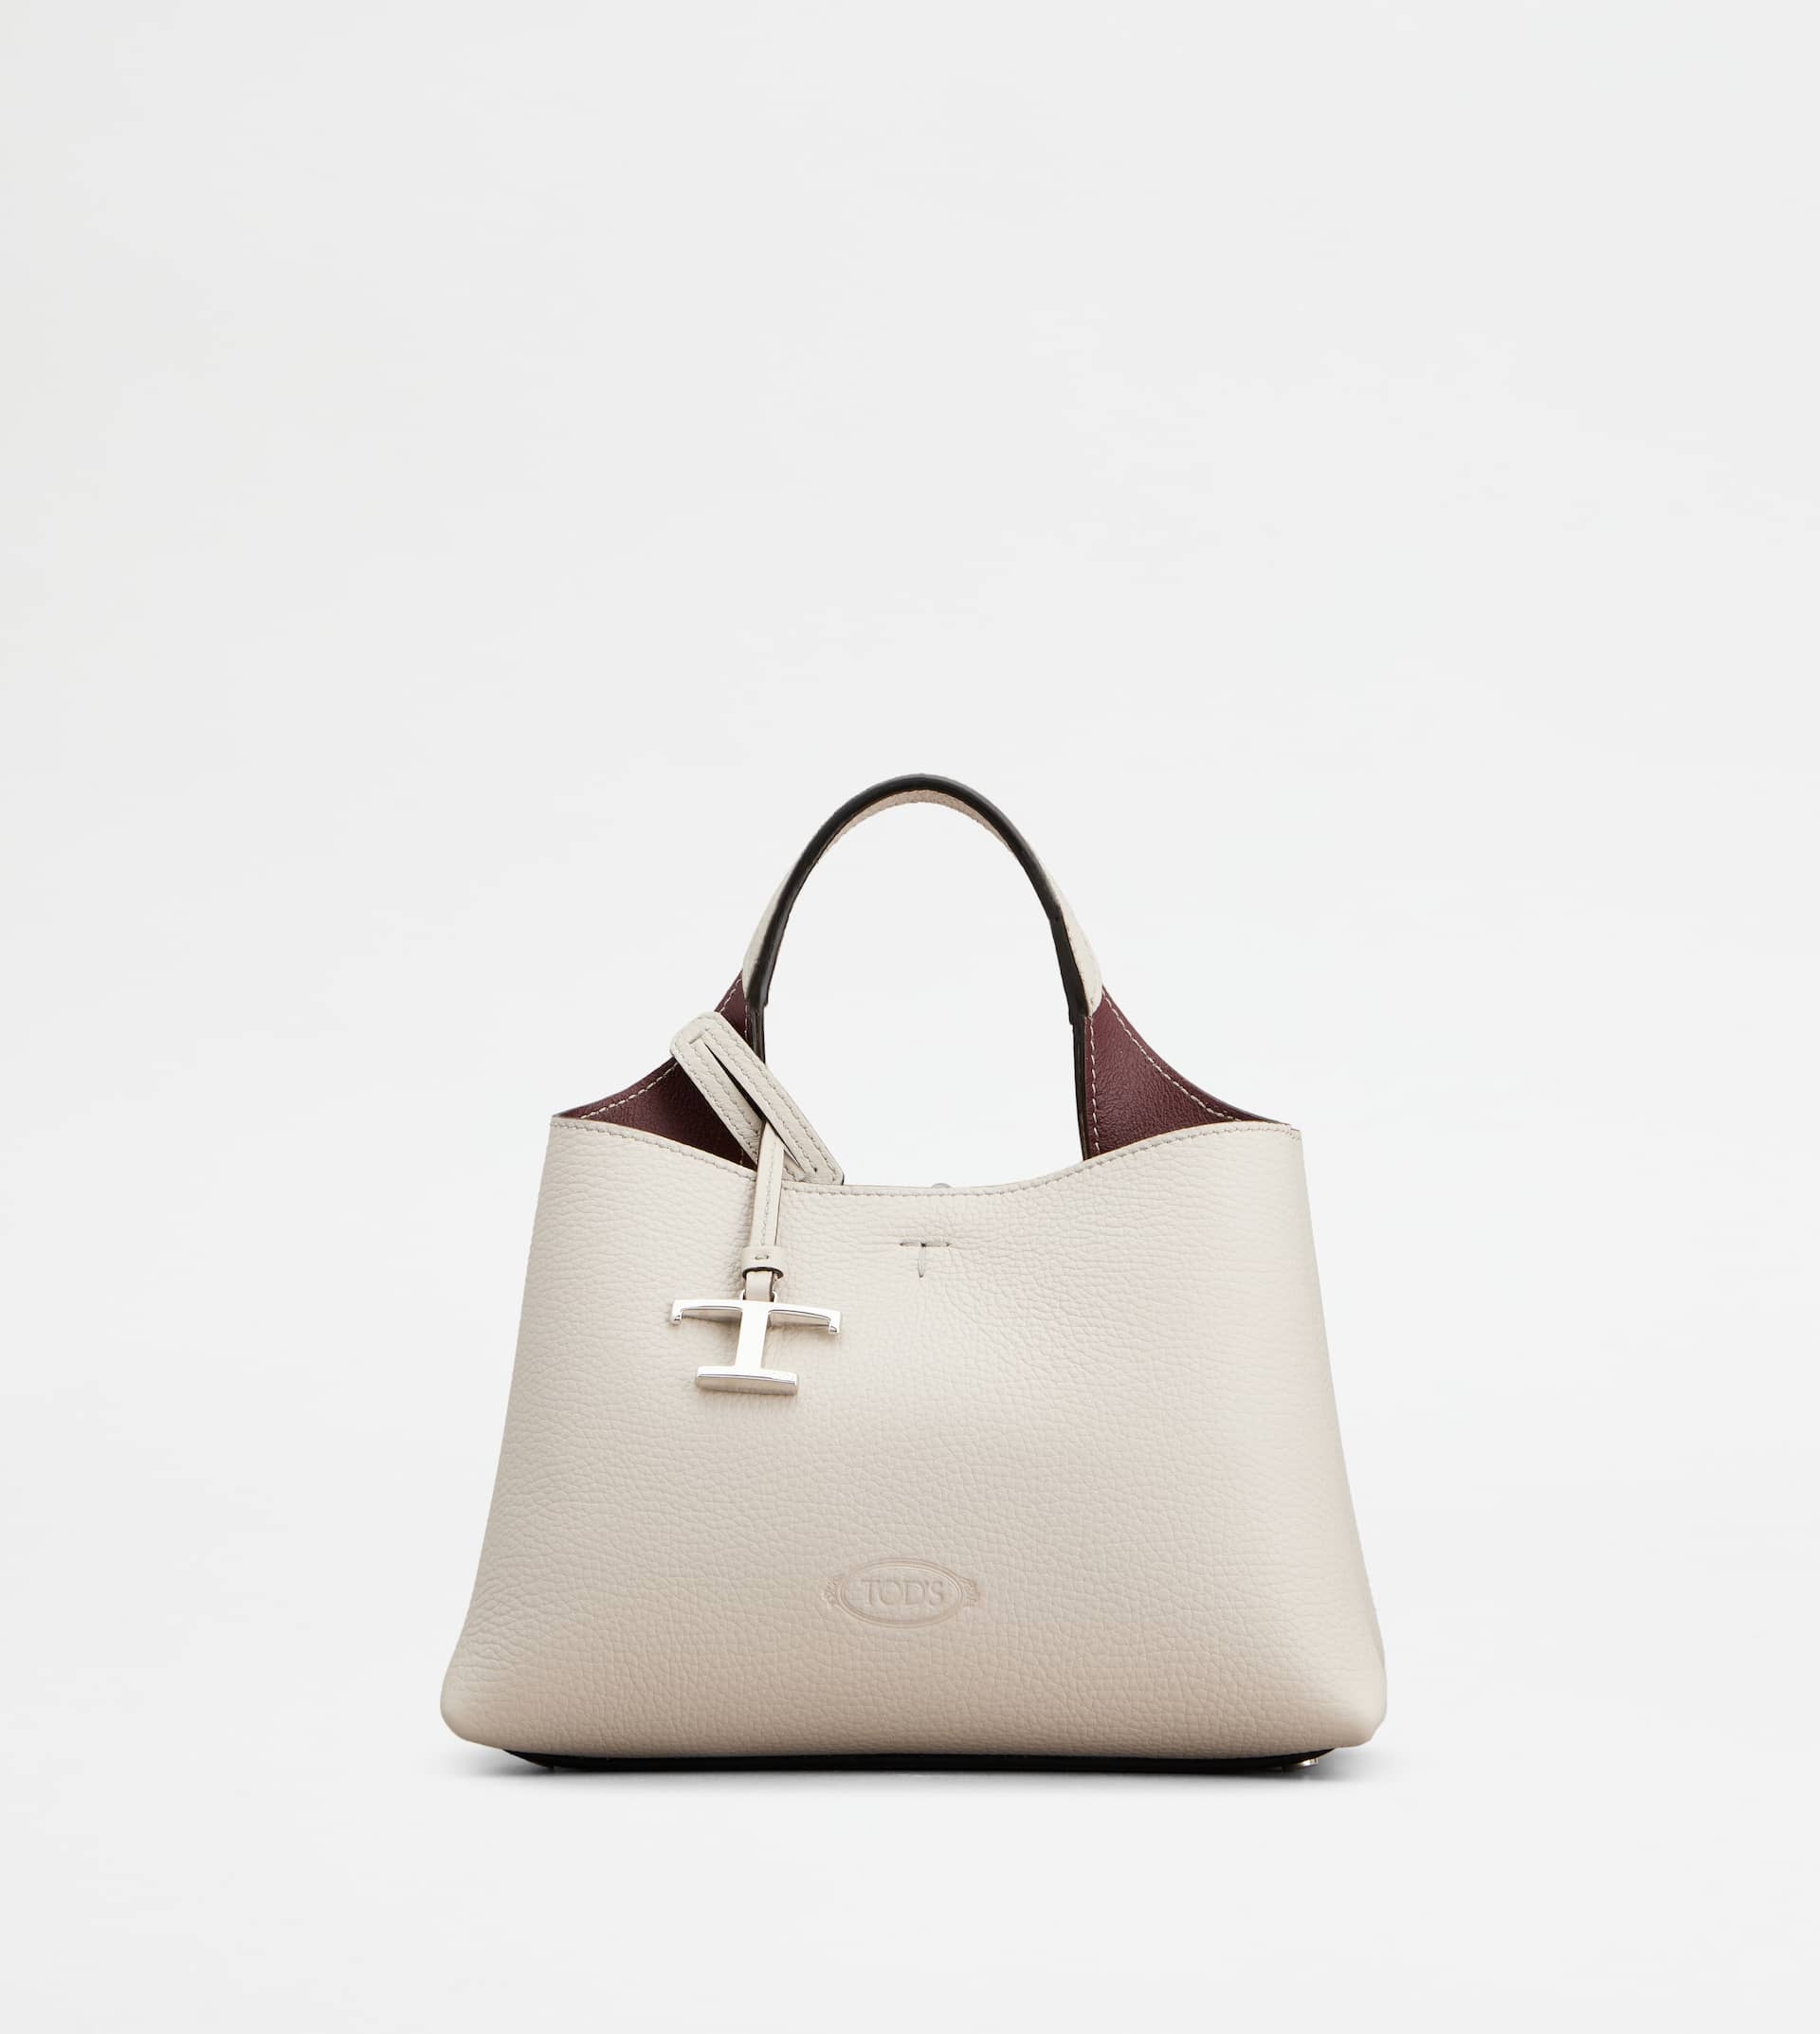 BAG IN LEATHER MICRO - GREY - 1